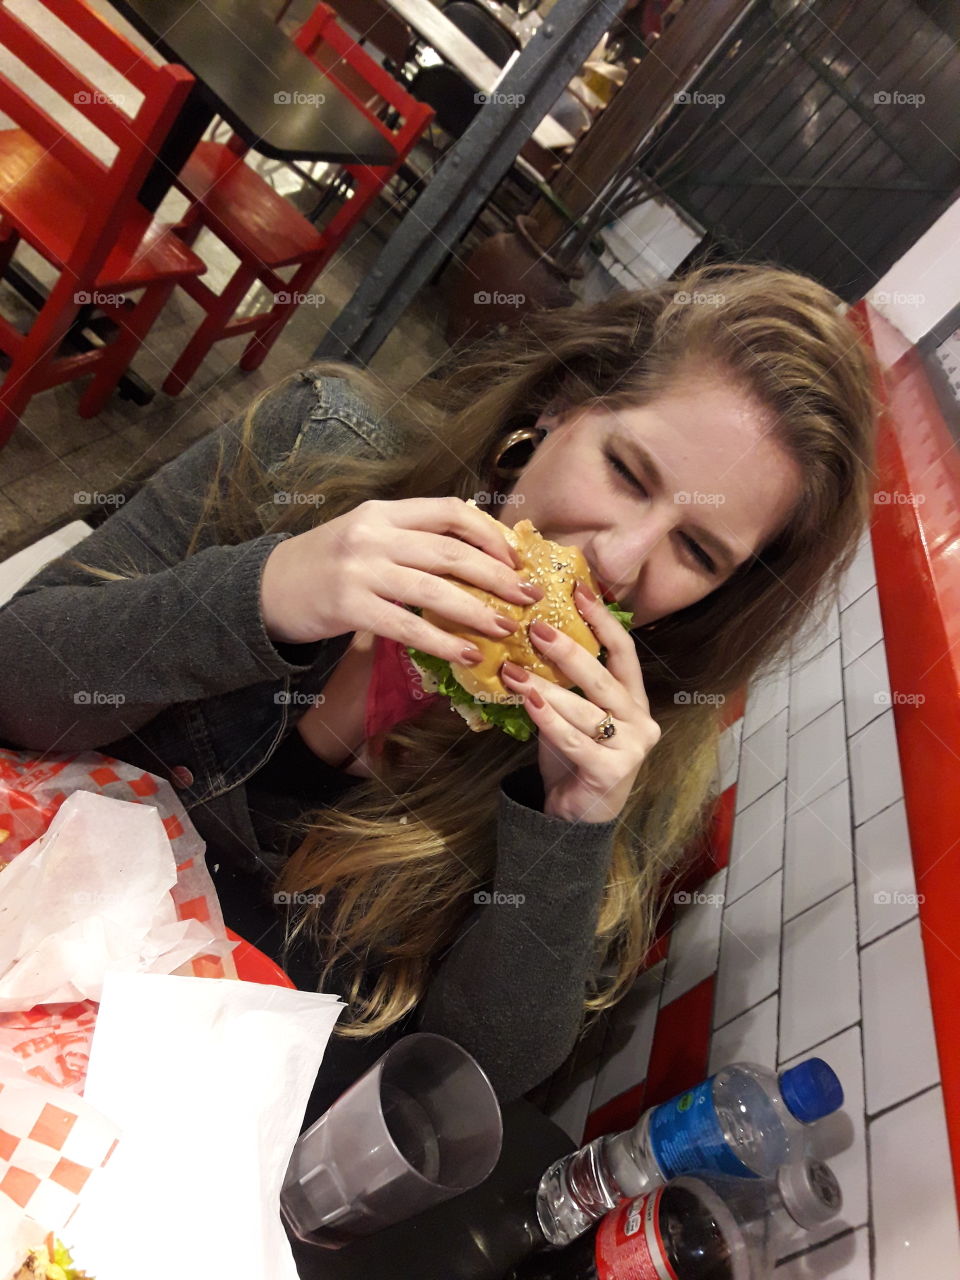 Silly girl taking a big bite of a burger